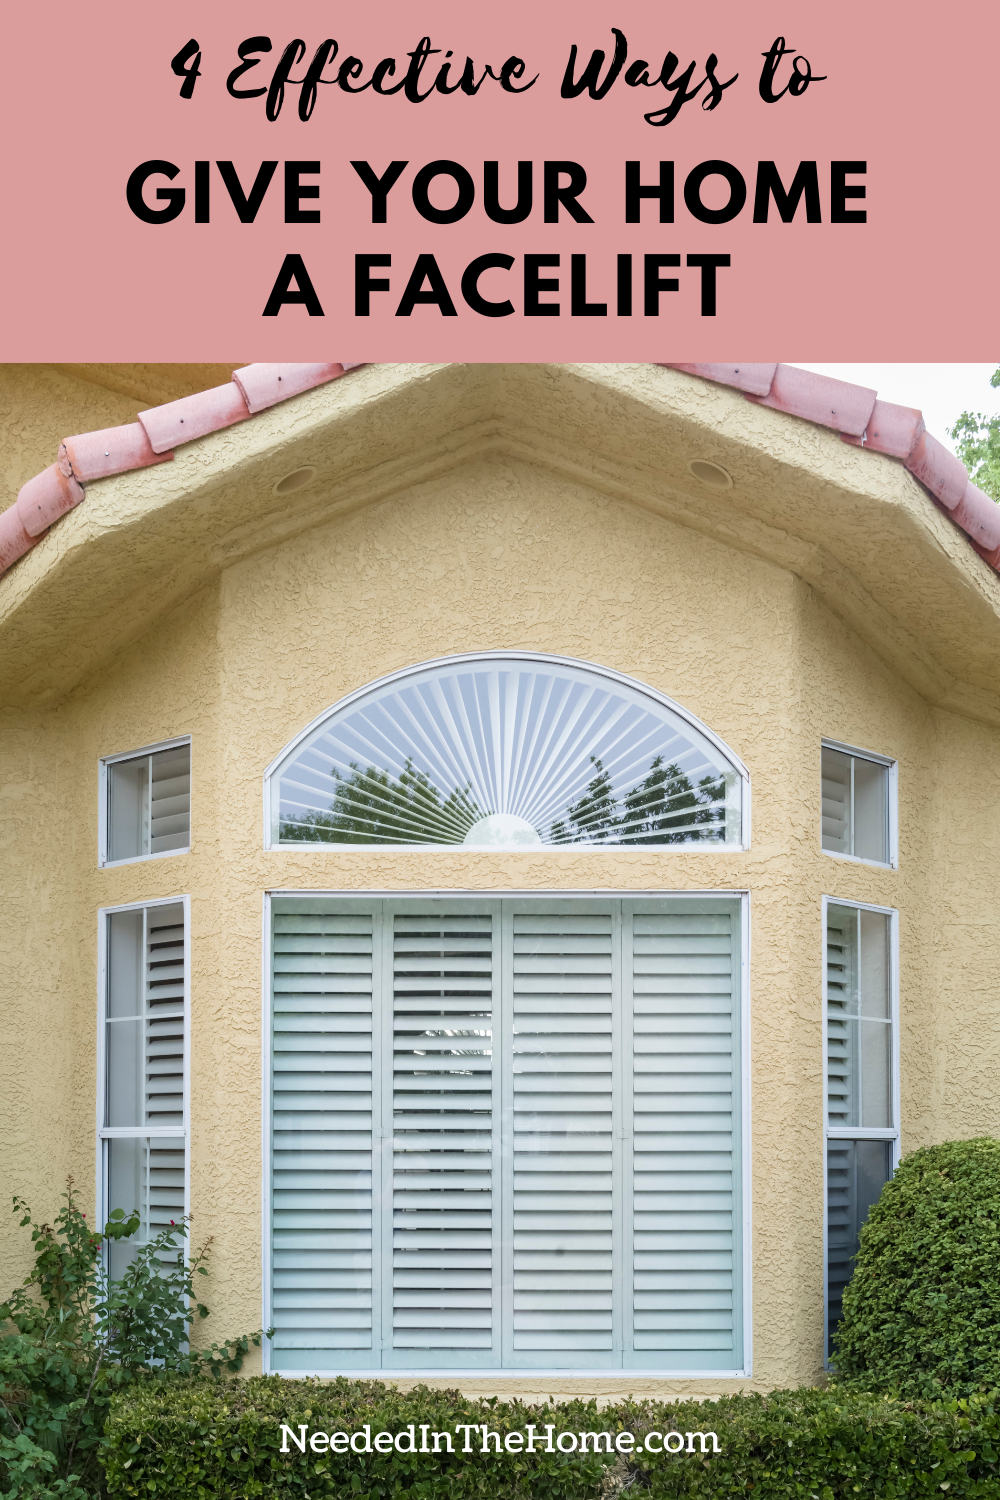 pinterest-pin-description 4 effective ways to give your home a facelift bay window with sunshine arch neededinthehome